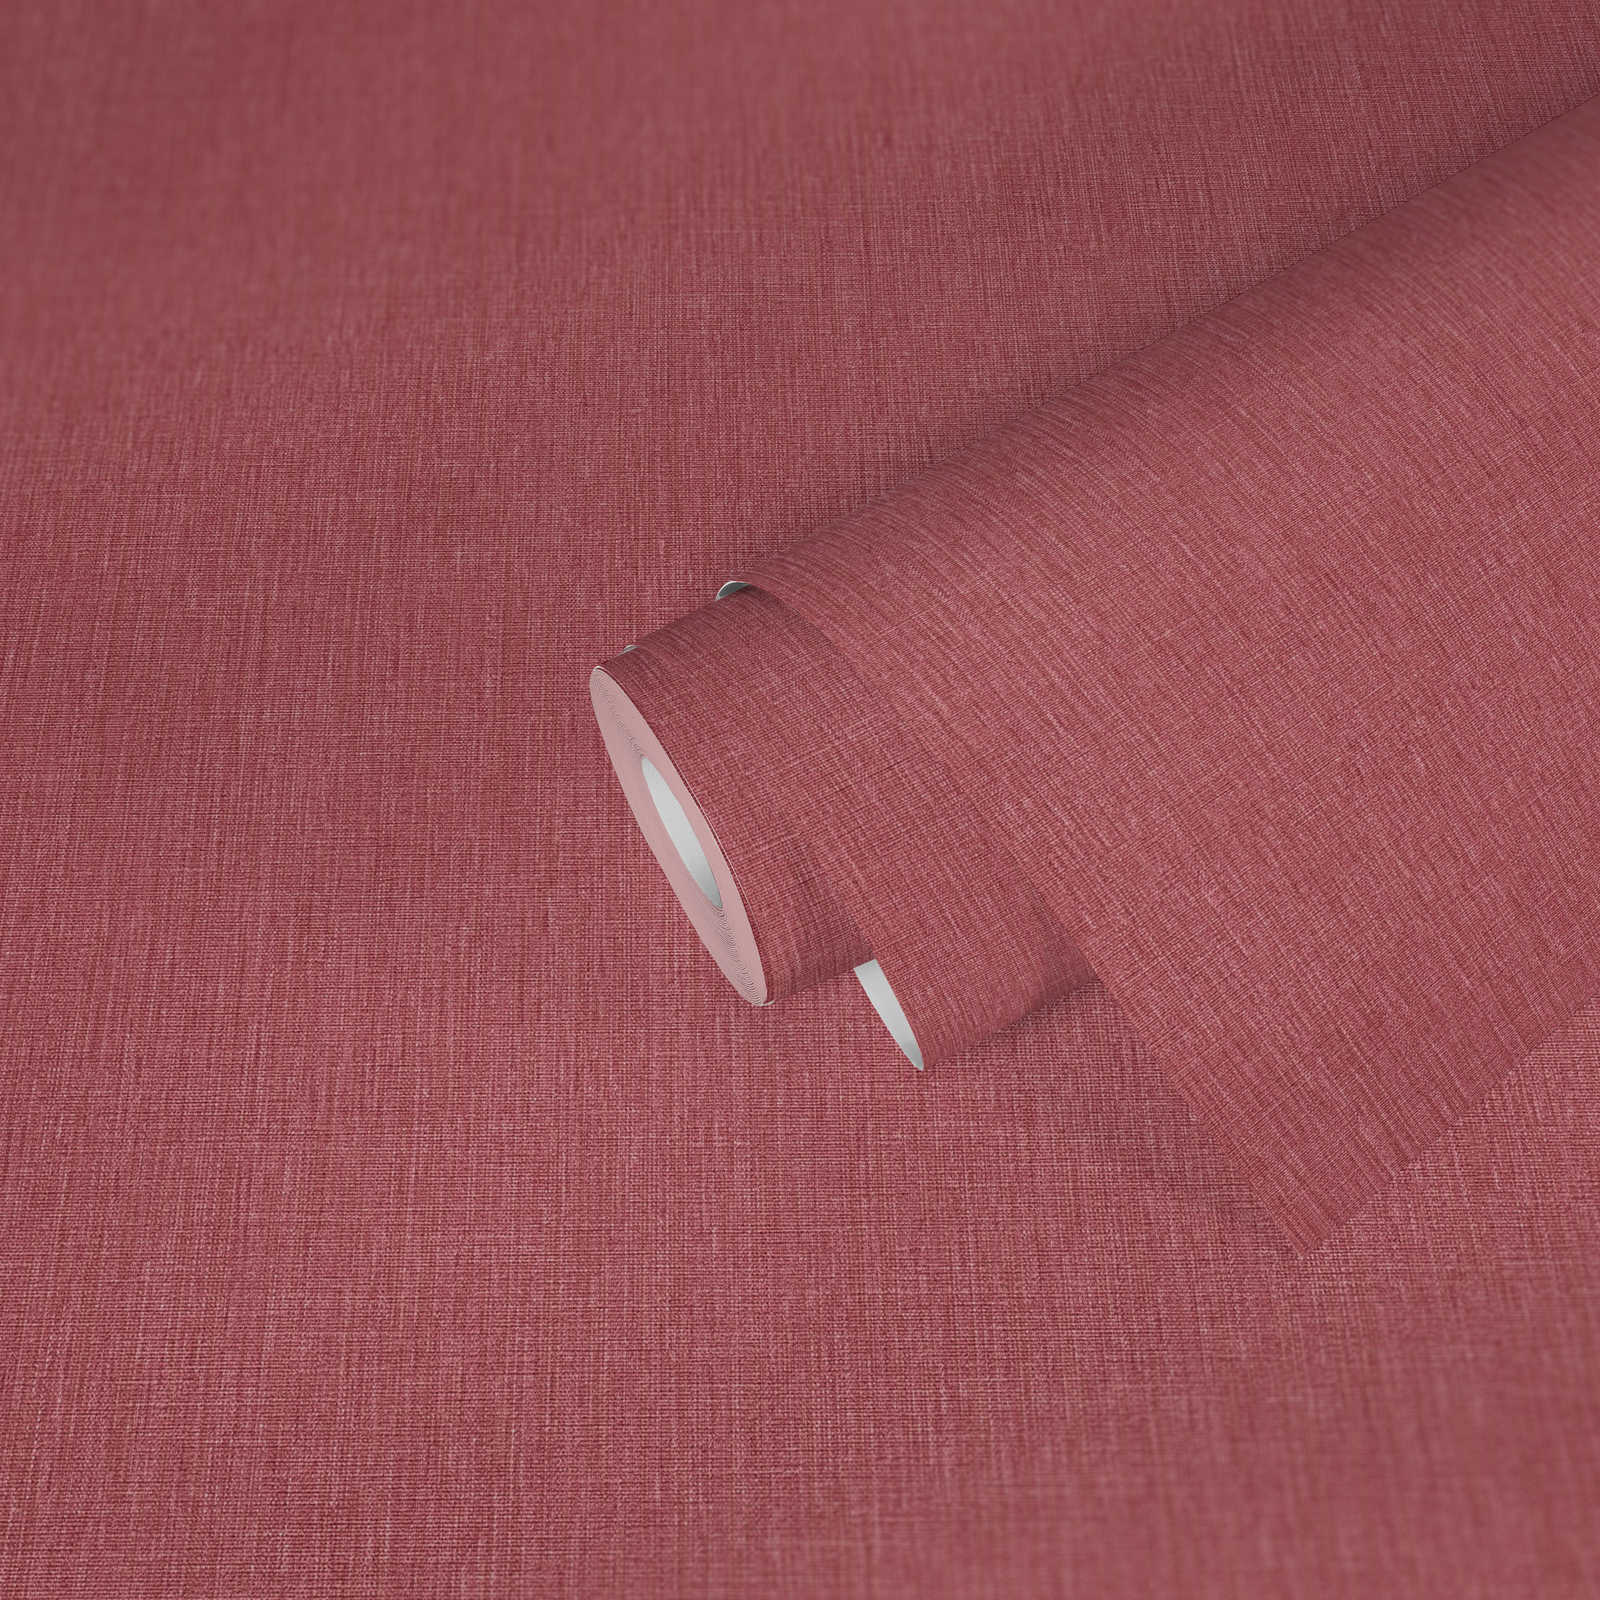             Non-woven wallpaper in one colour with textile look in matt finish - red
        